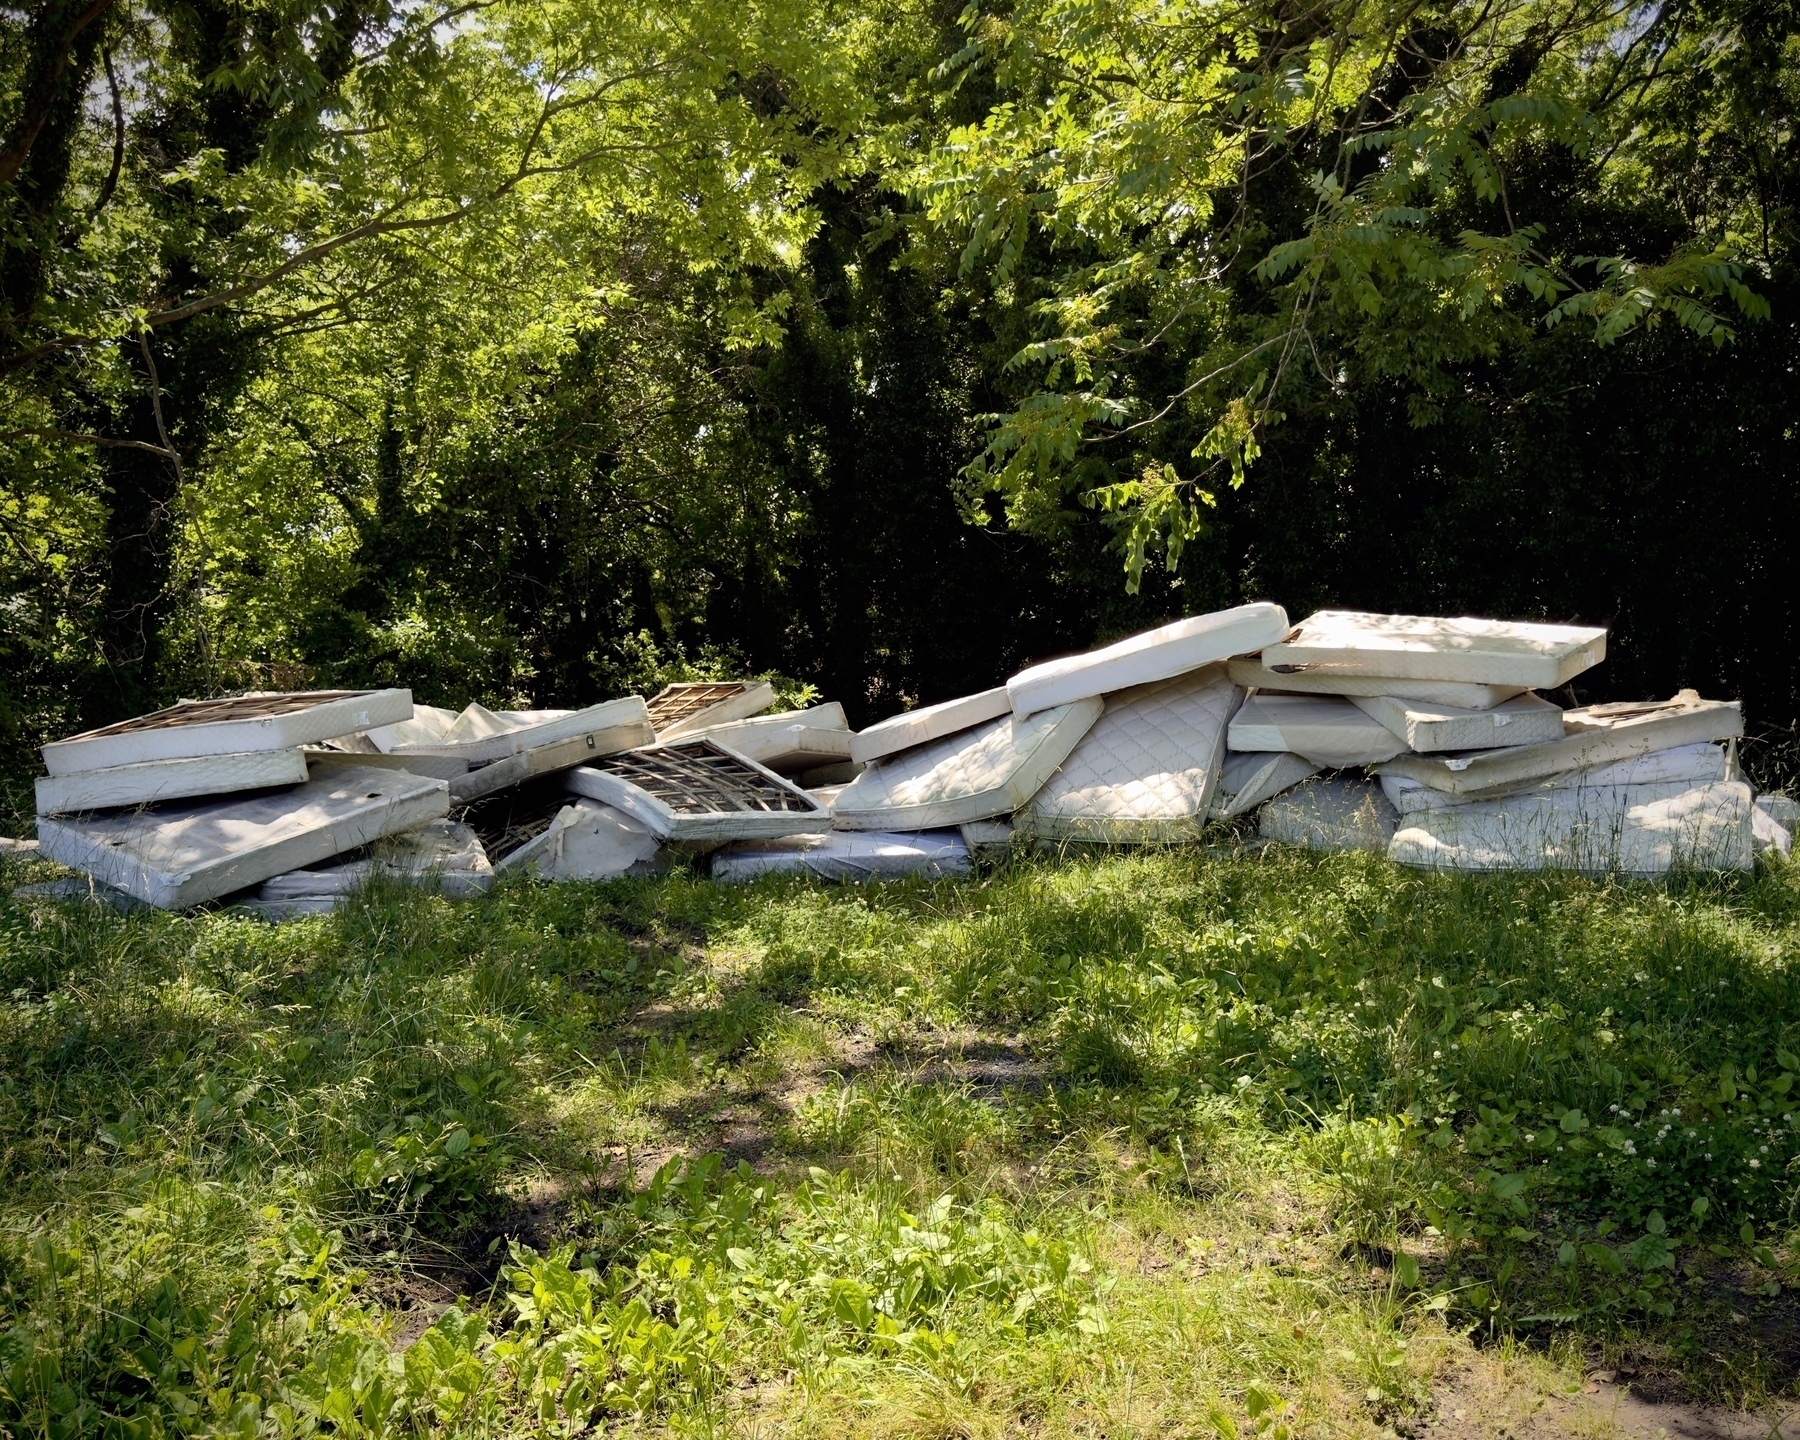 A pile of old mattresses and box springs lay in a pile in the trees beside the highway 